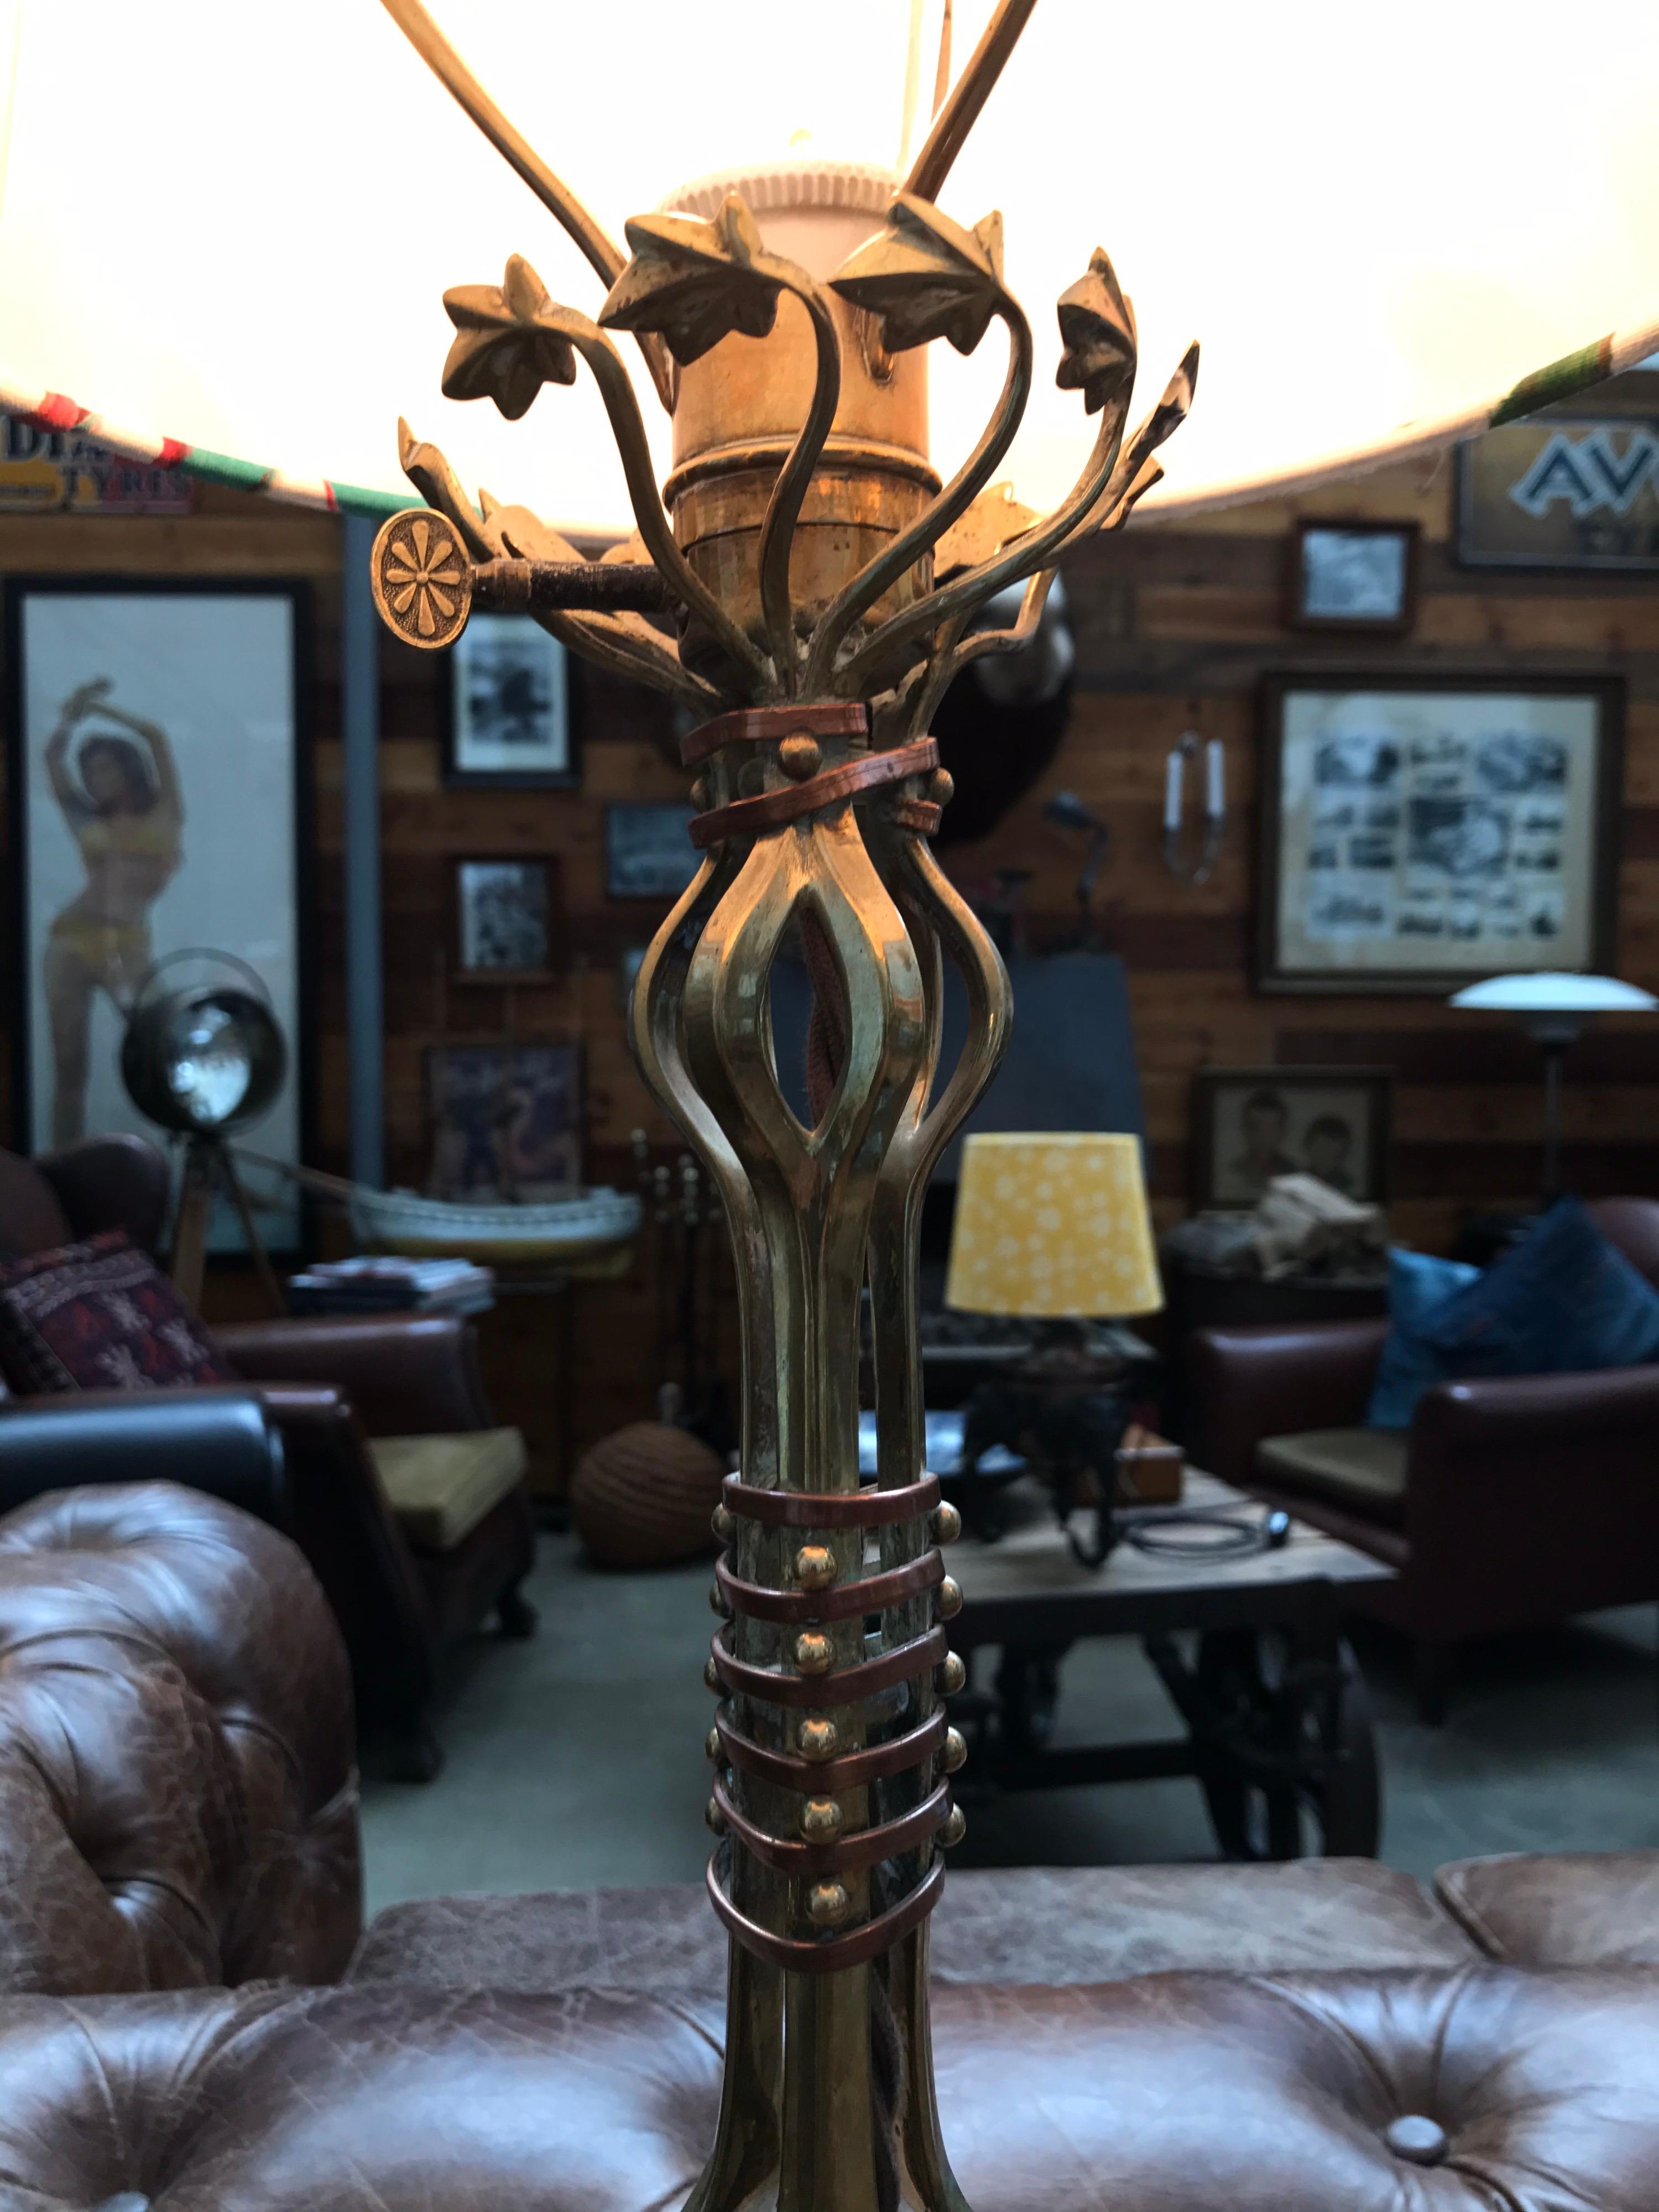 Large antique brass Arts and Crafts table lamp in the manner of WAS Benson.
Beautiful English country house style.
Rewired and can be mounted with an EU or US plug.
Shade not included 